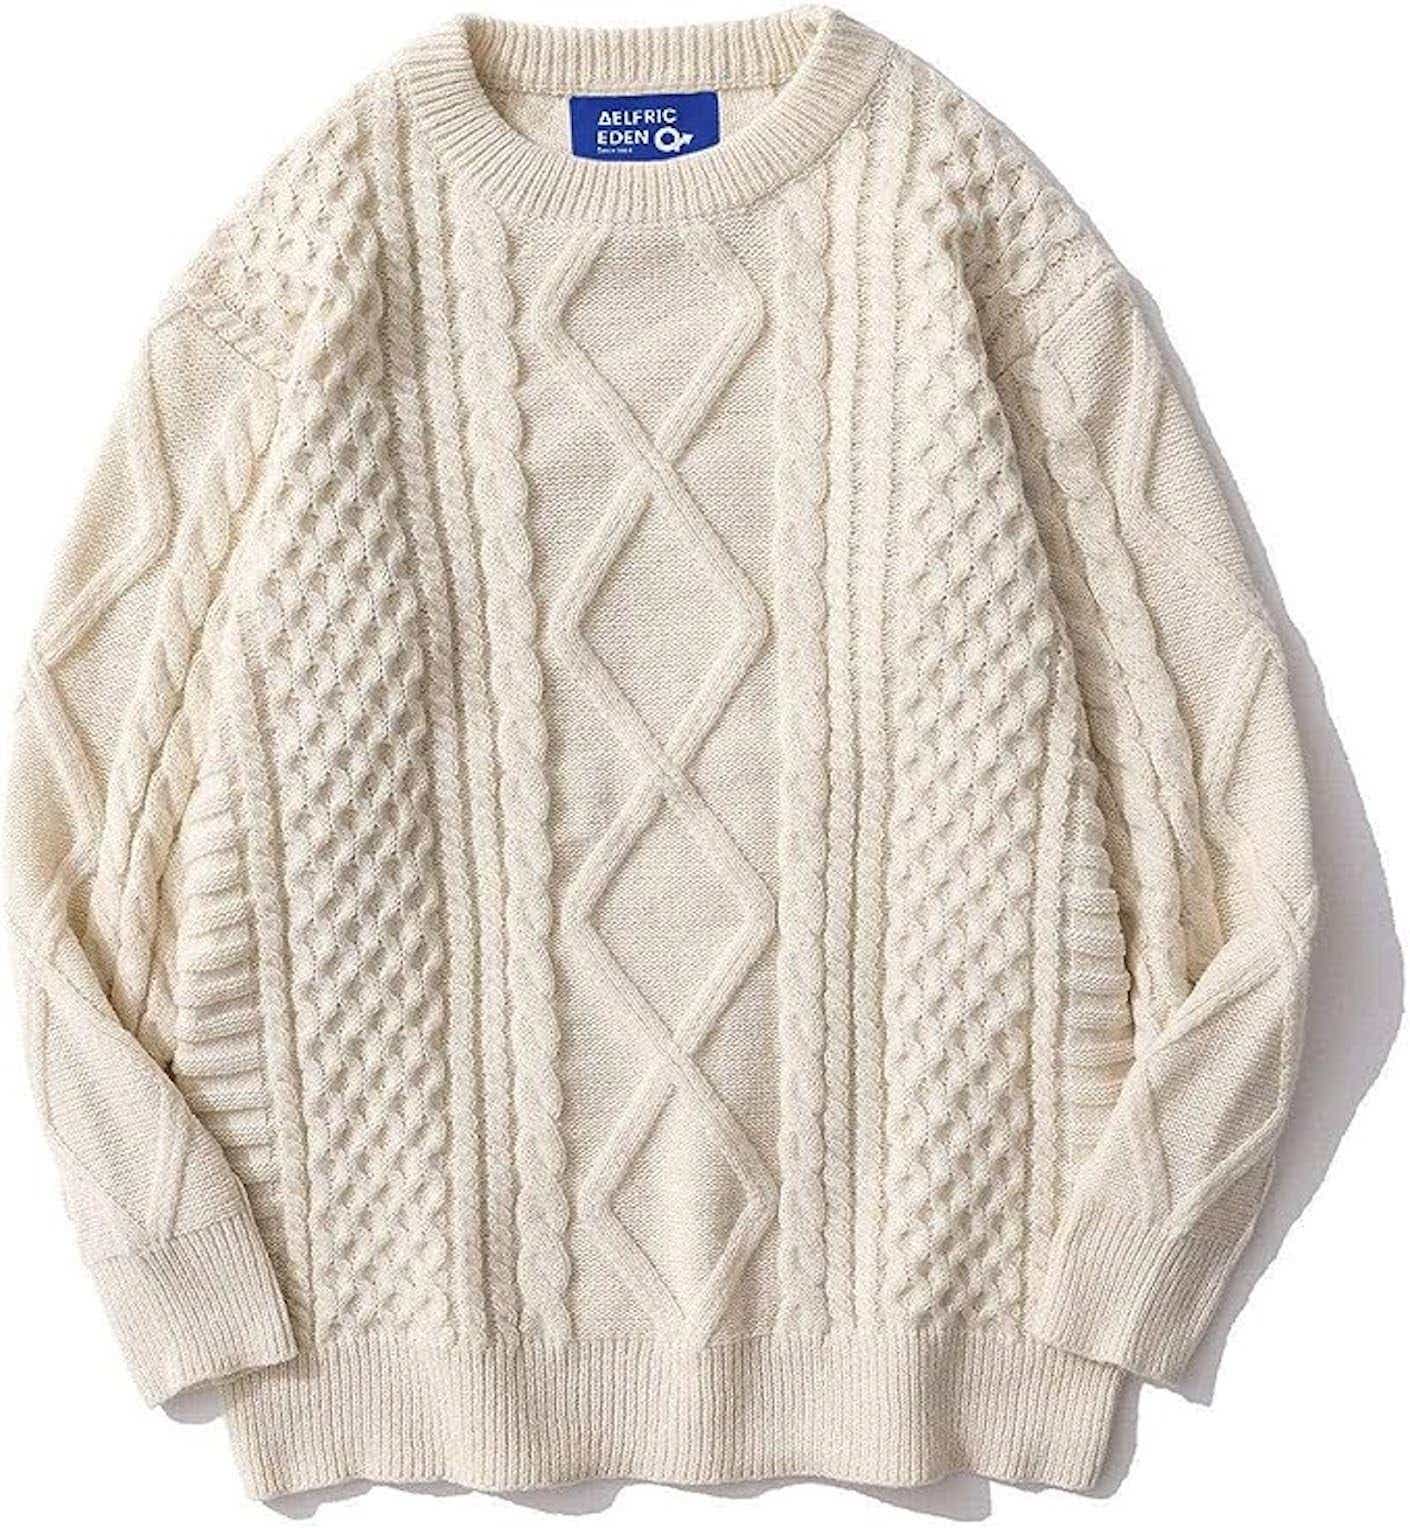 A cream cable knit sweater